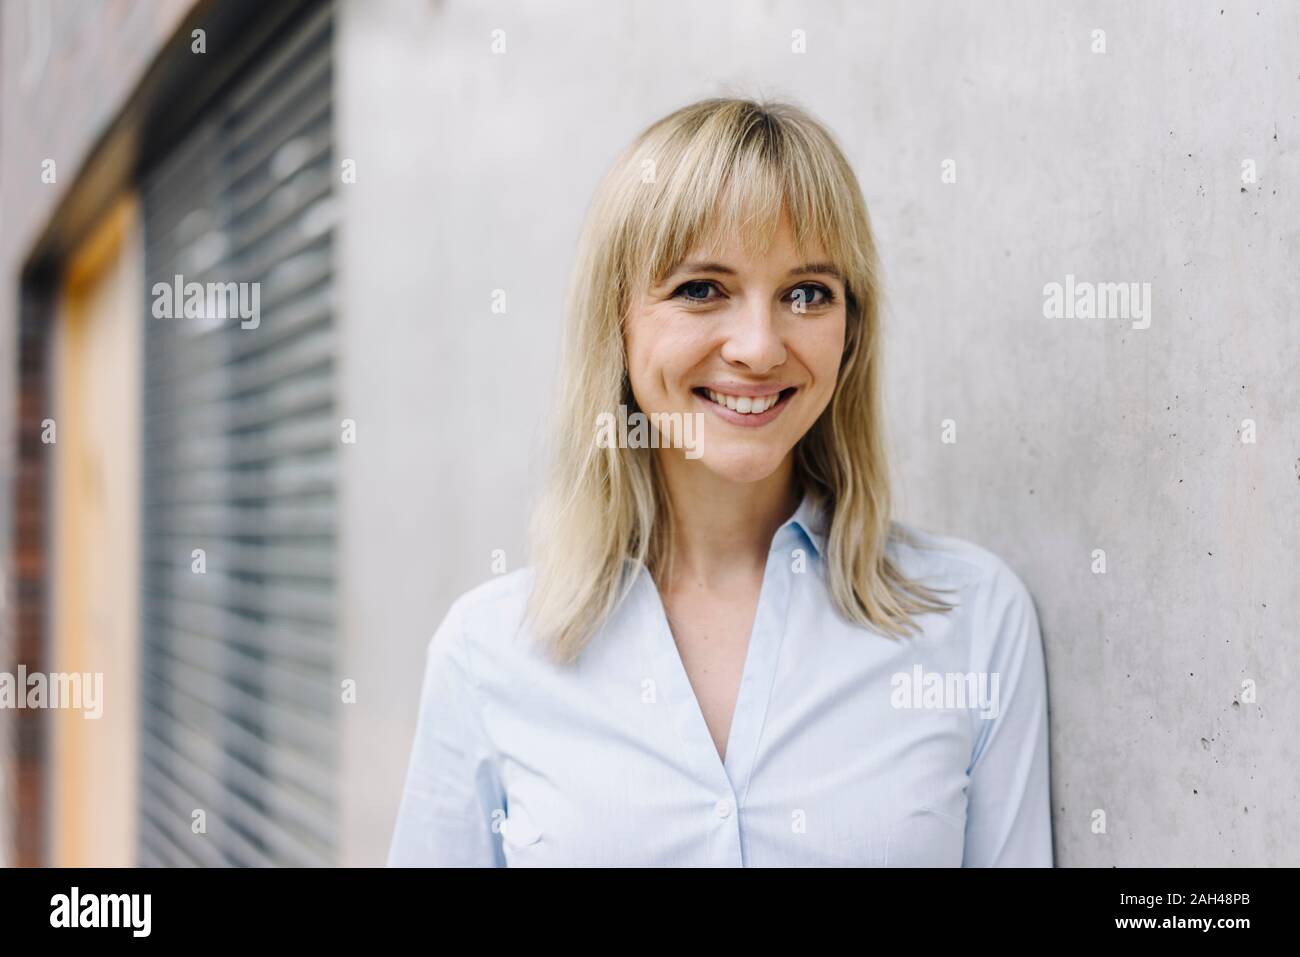 Portrait of a smiling young businesswoman leaning against a wall Stock Photo